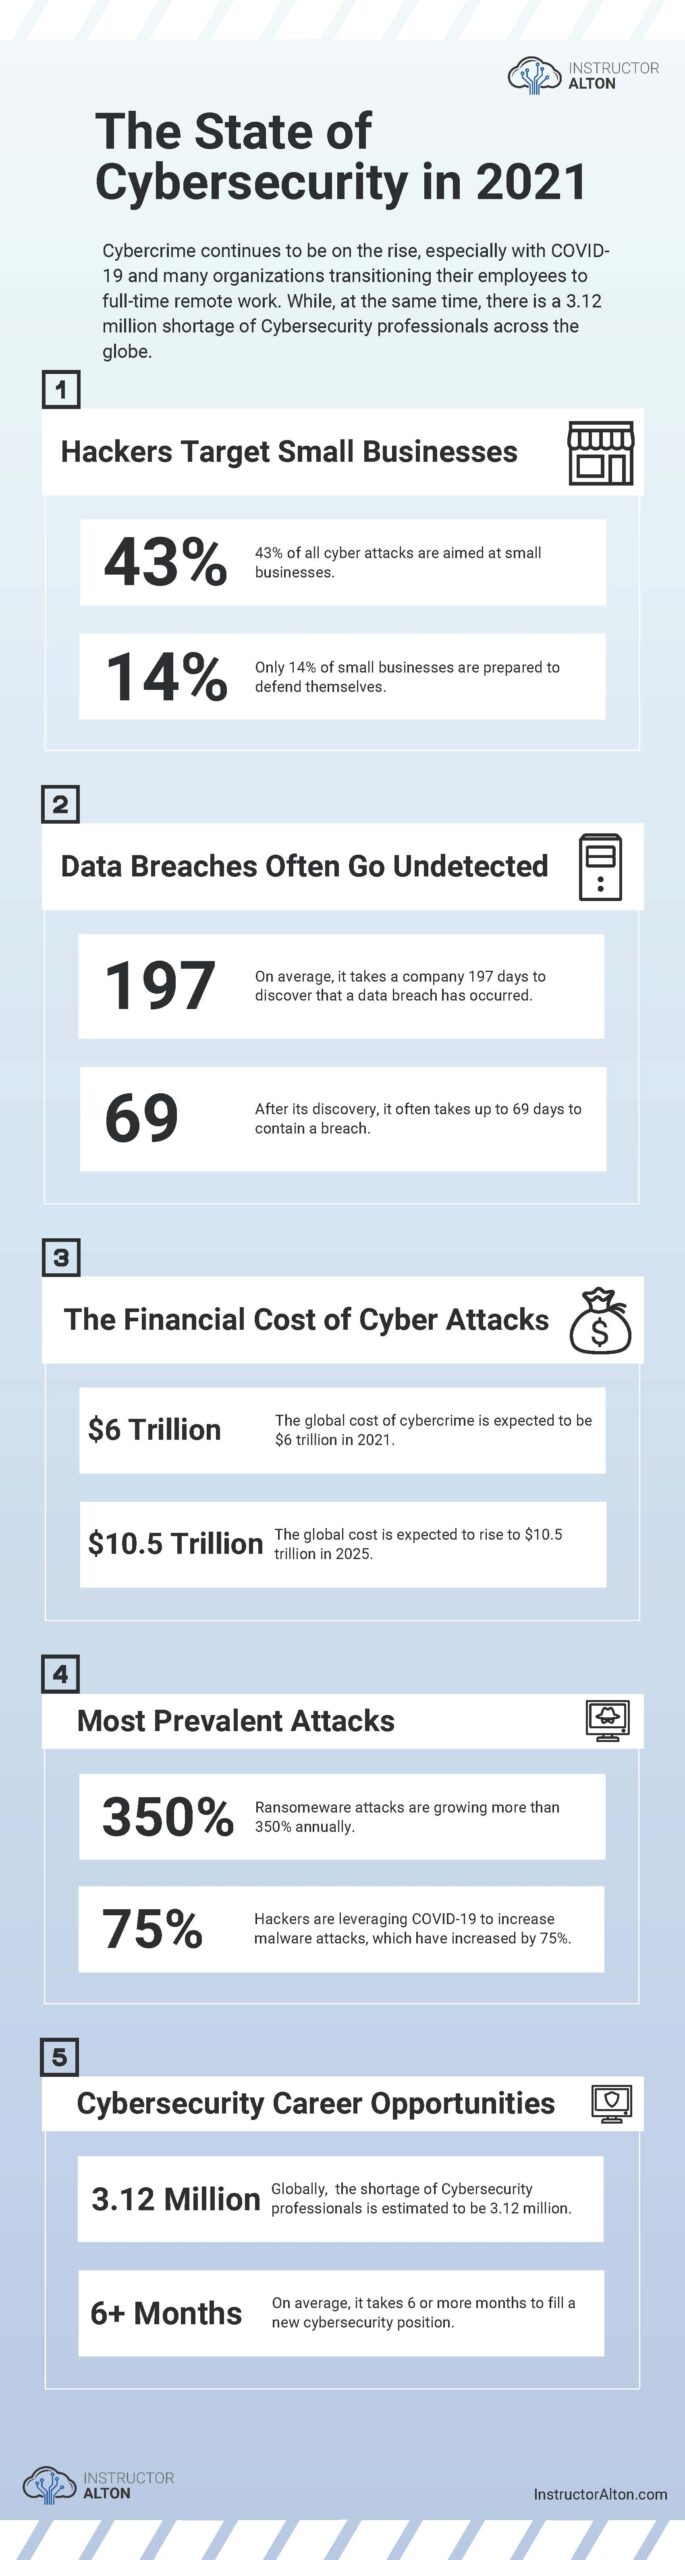 The State of Cybersecurity in 2021